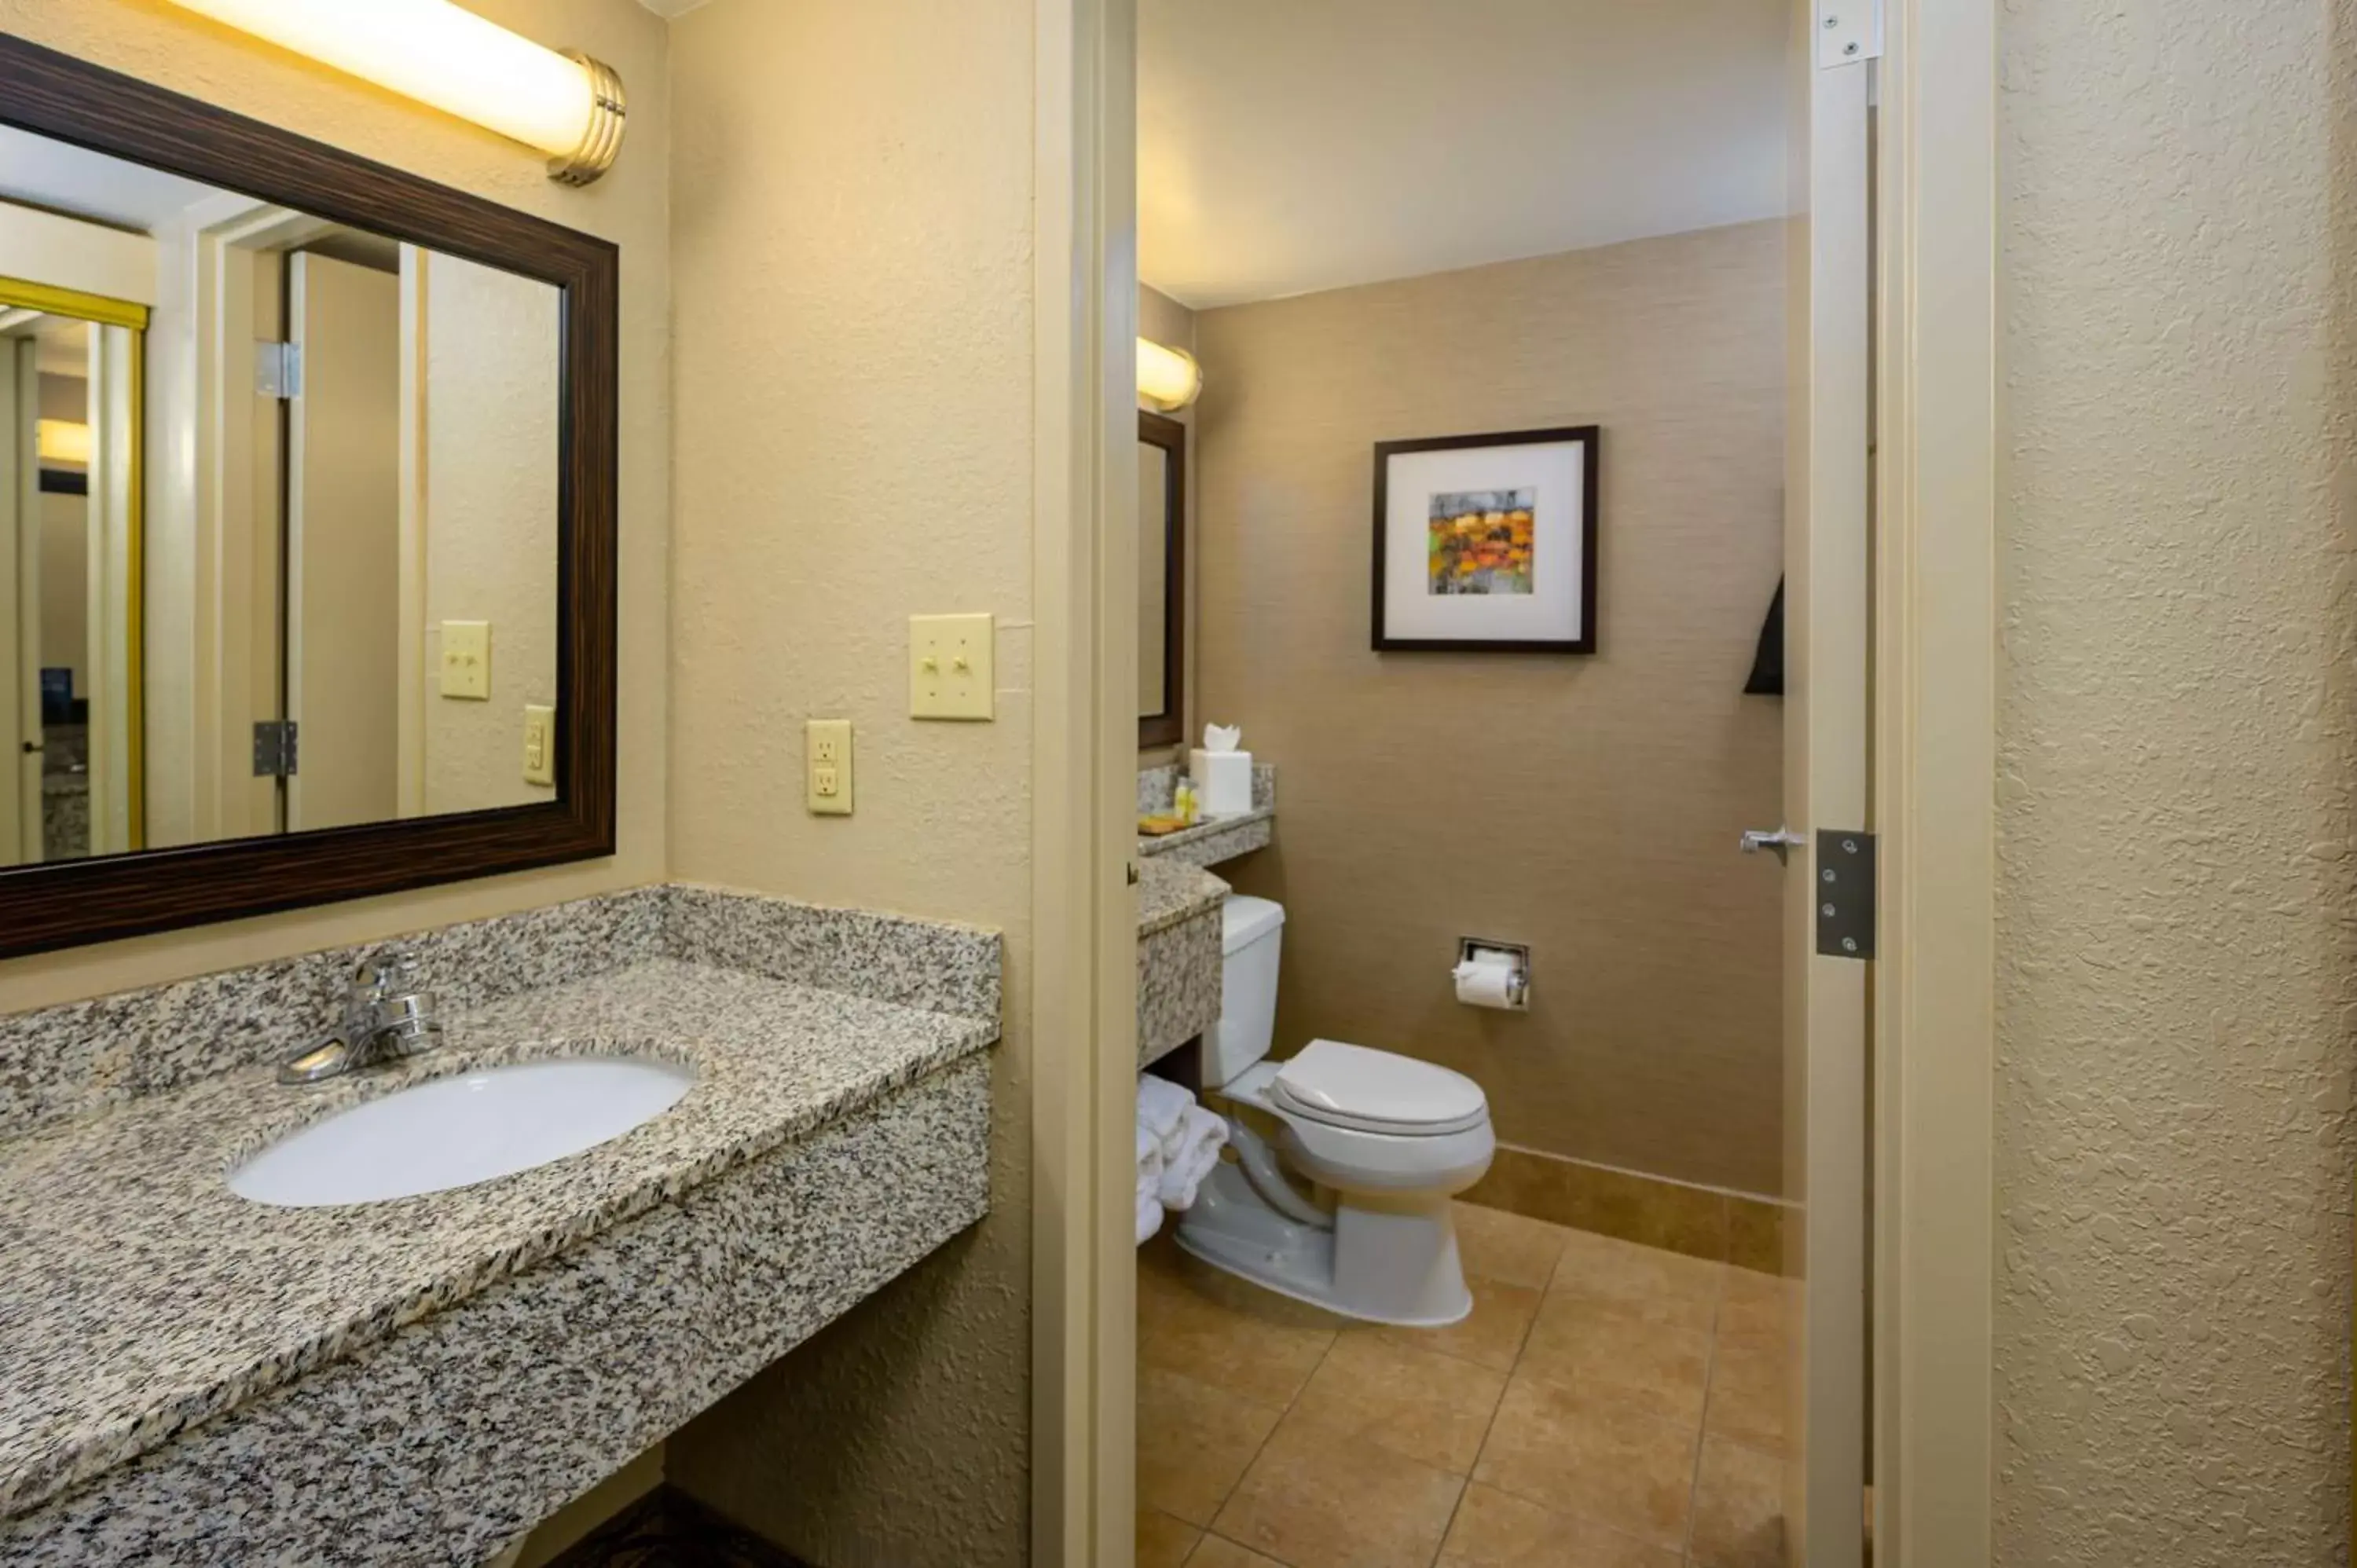 Bathroom in DoubleTree by Hilton Raleigh Midtown, NC